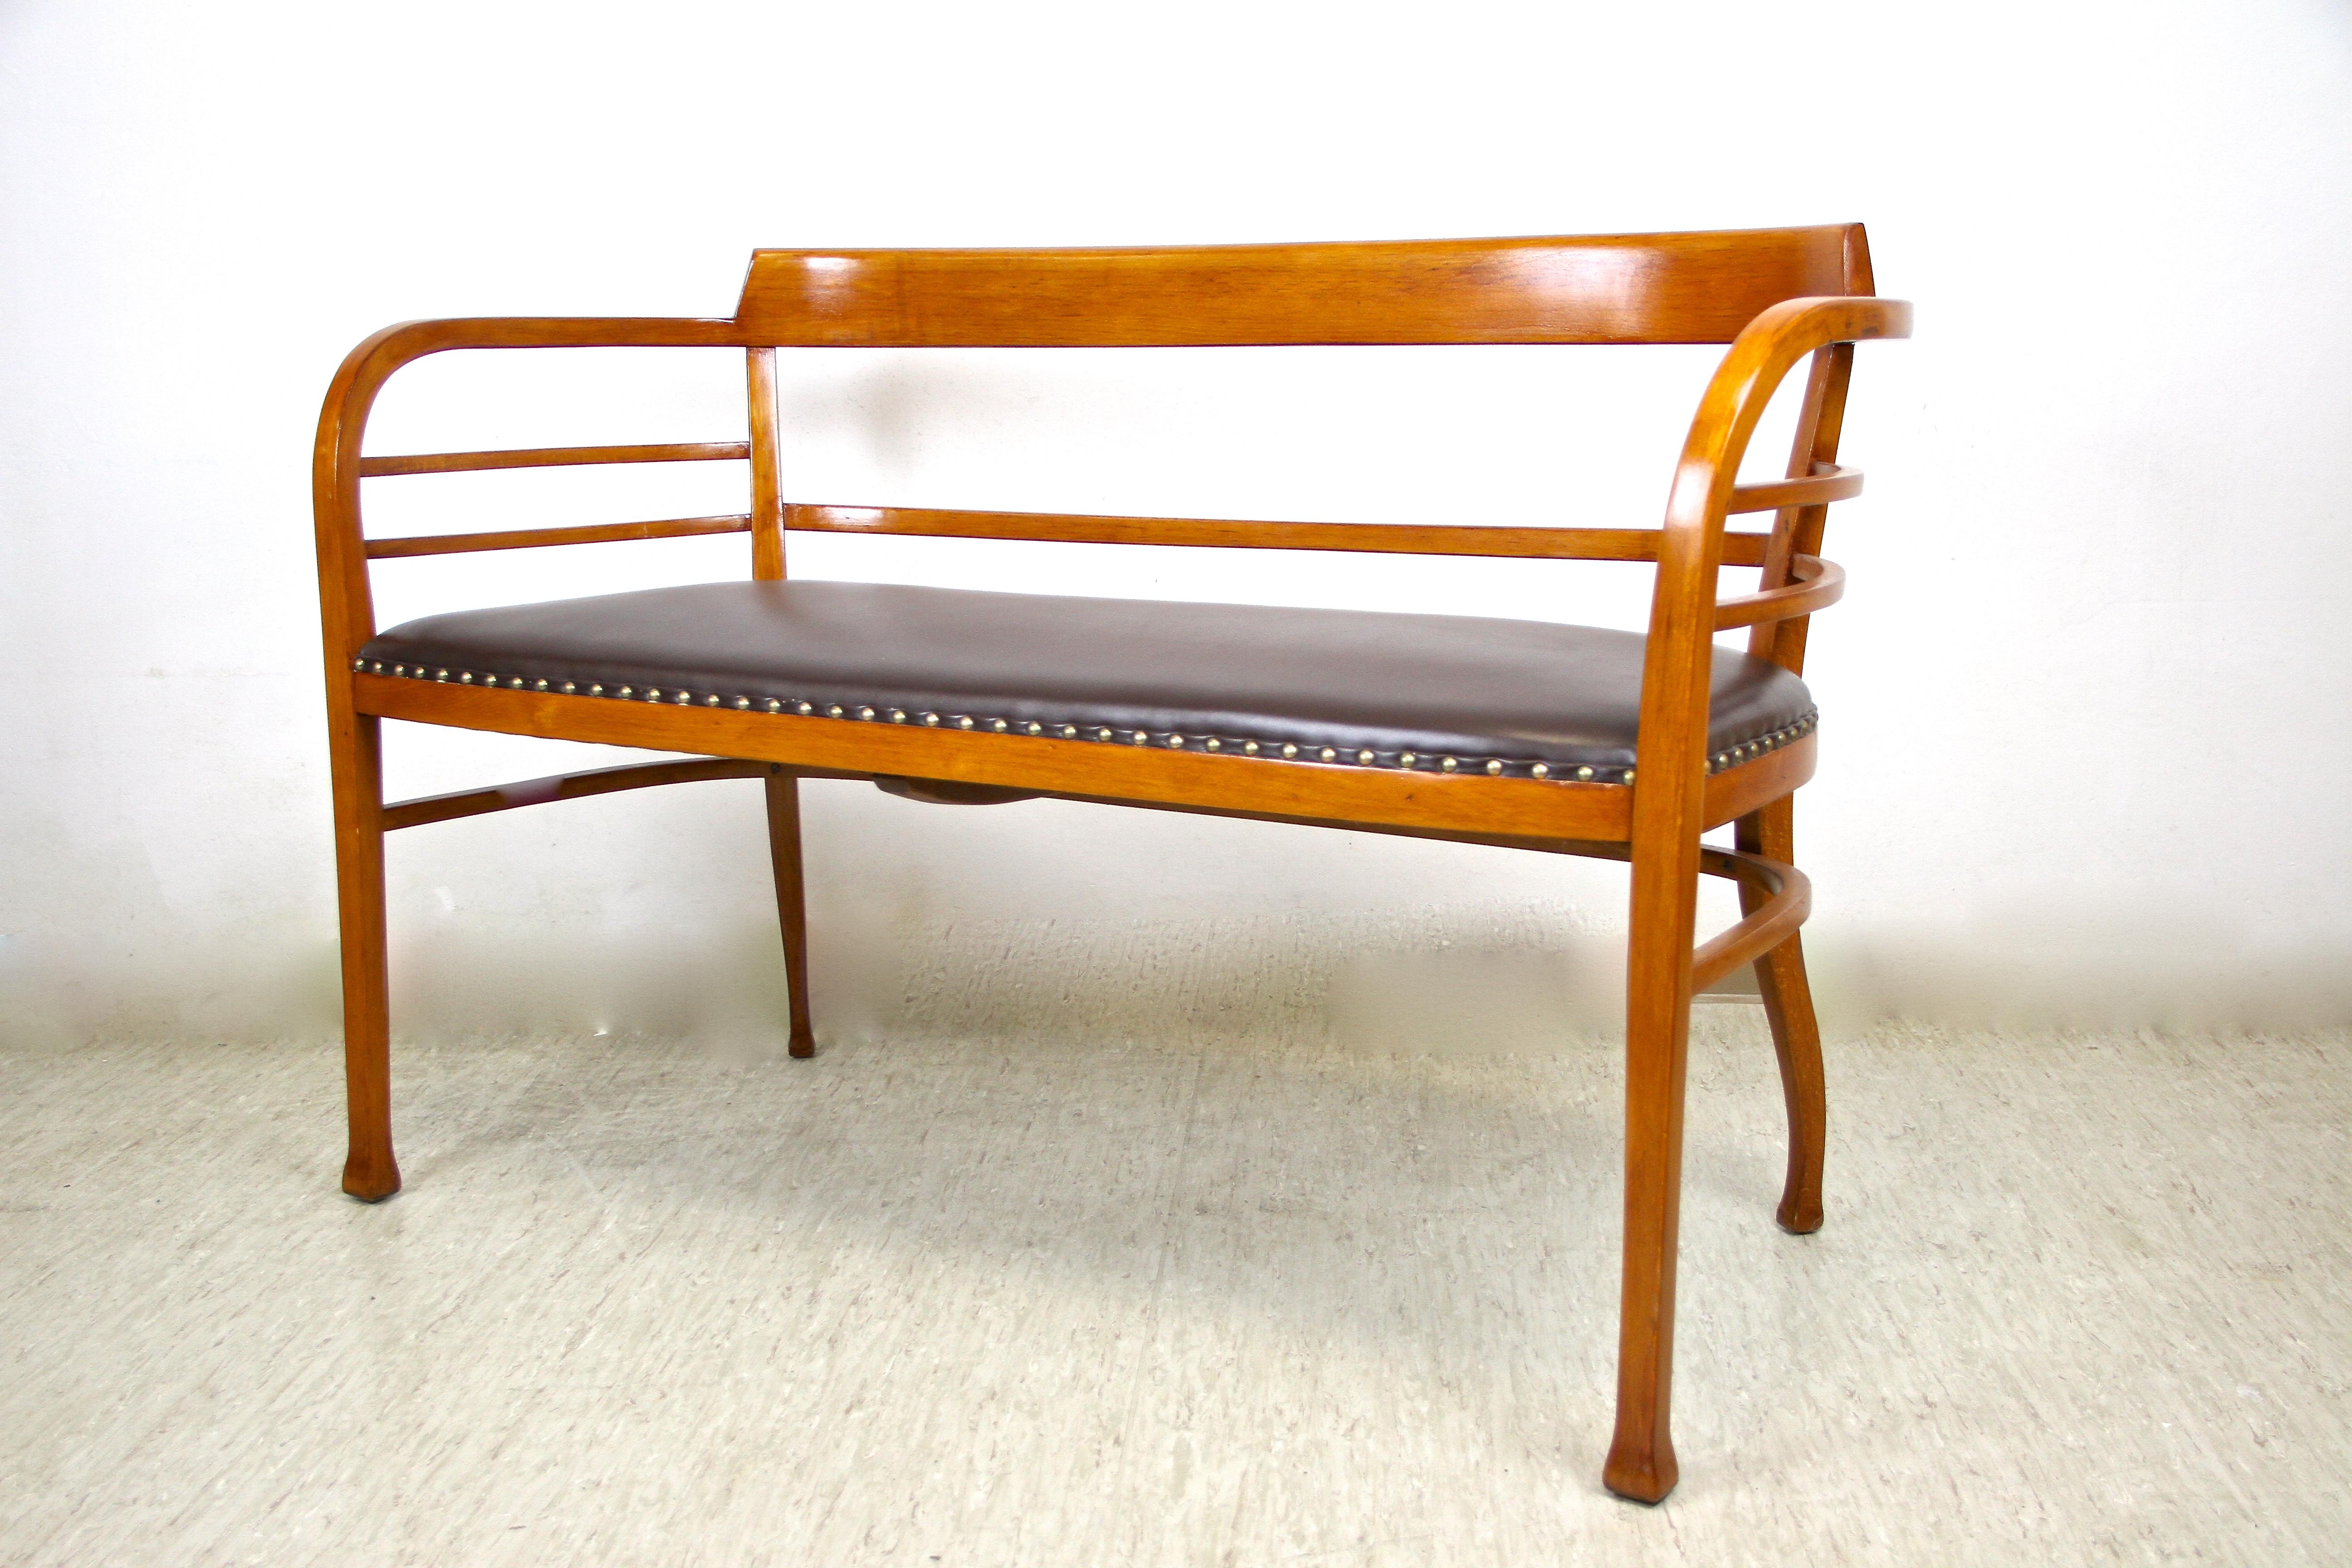 Leather Thonet Bentwood Bench Attributed To Otto Wagner, Austria, circa 1905